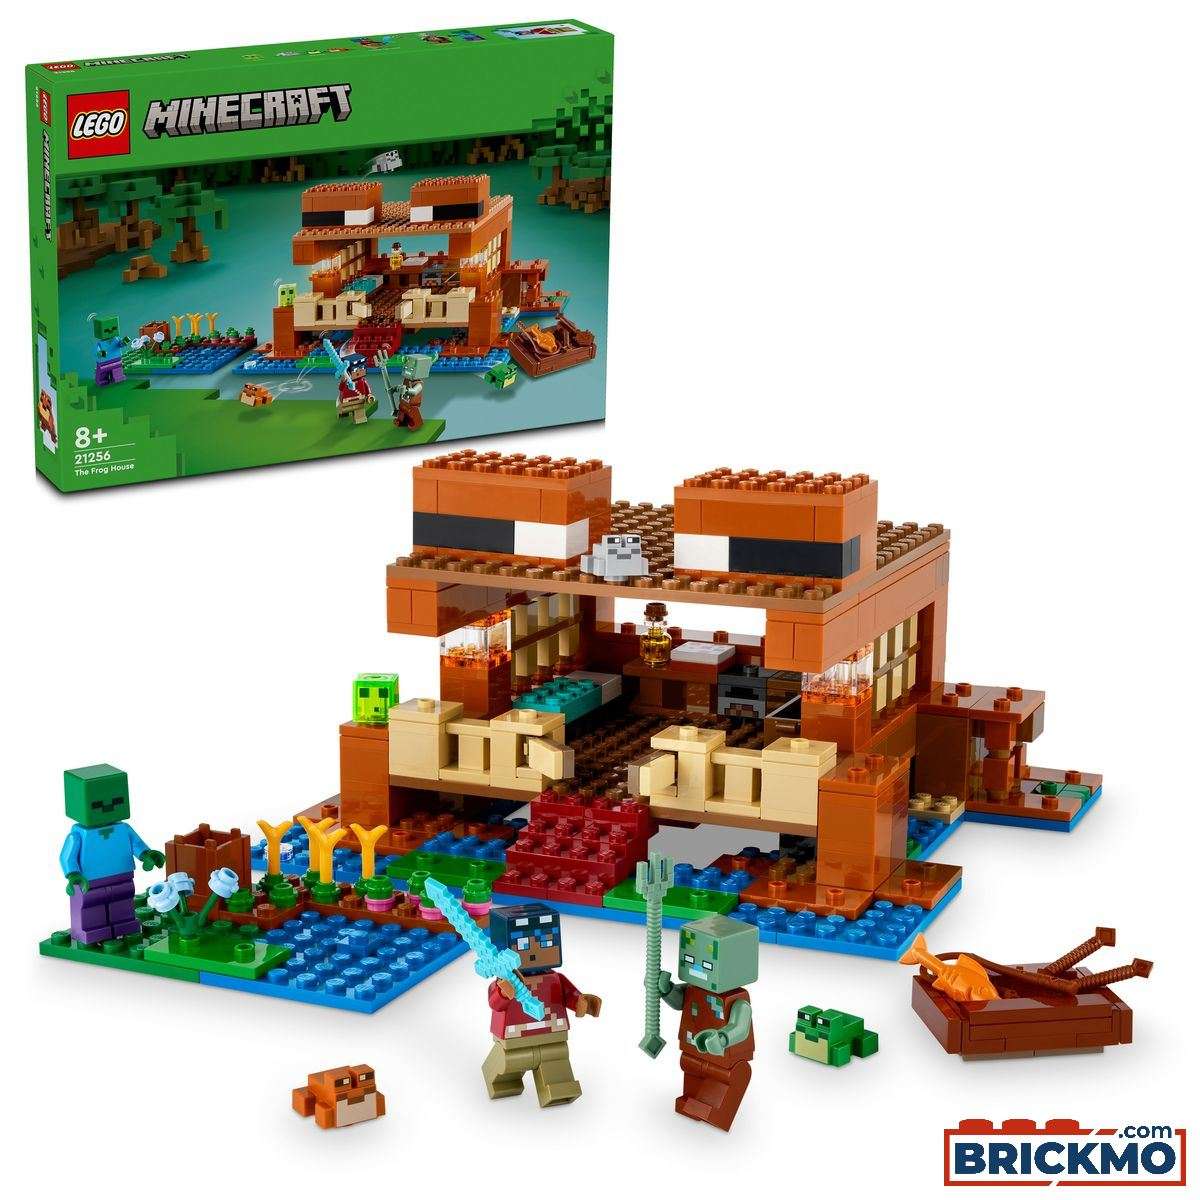 LEGO Minecraft 21256 The Frog House 21256